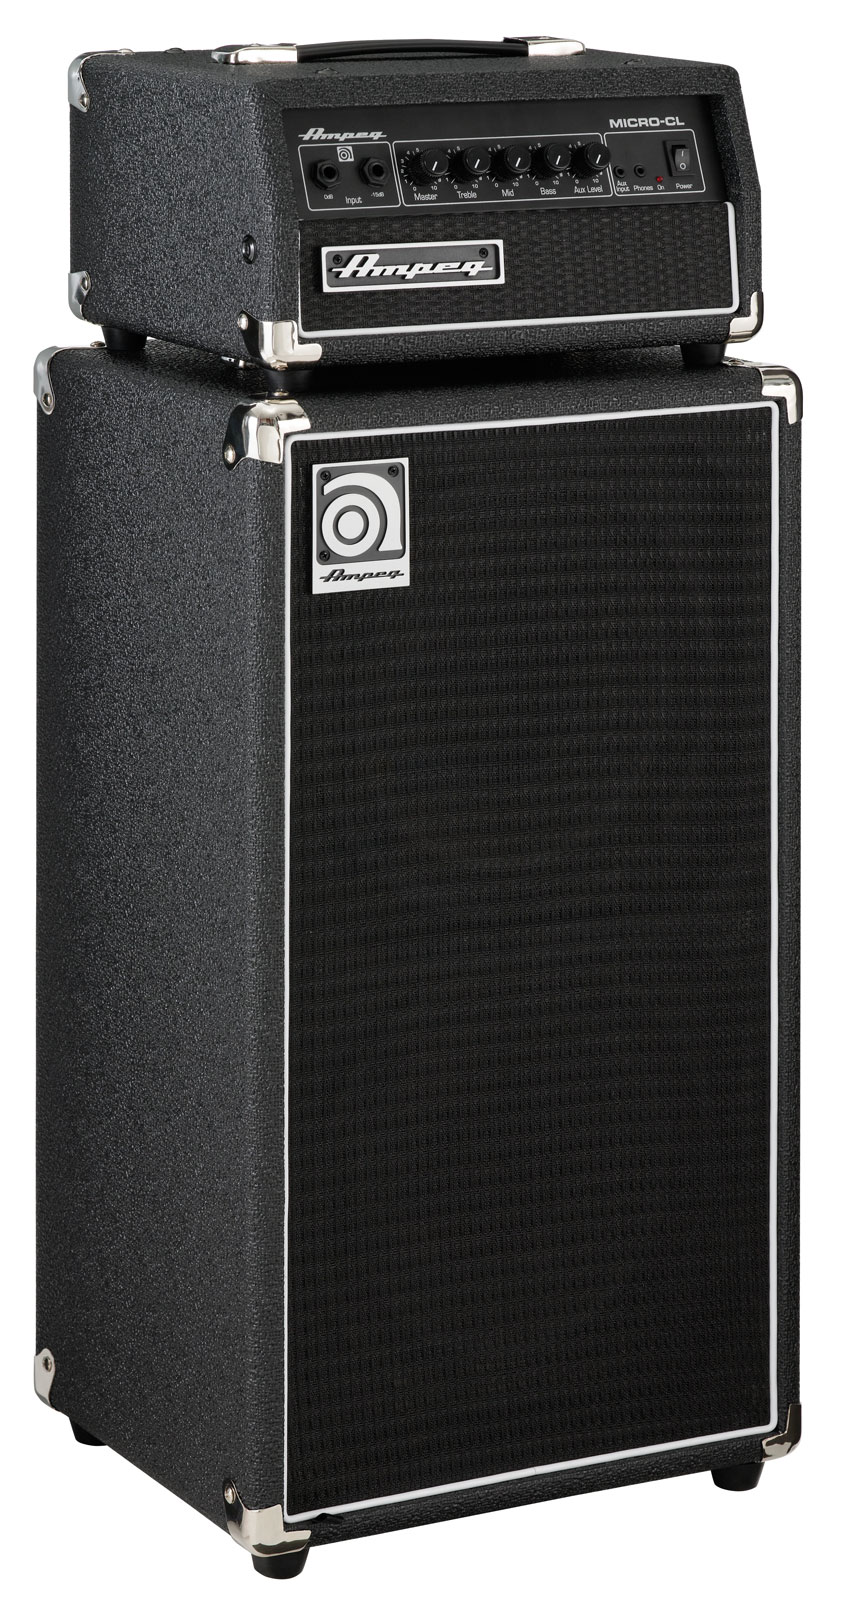  /   AMPEG MICRO-CL Stack